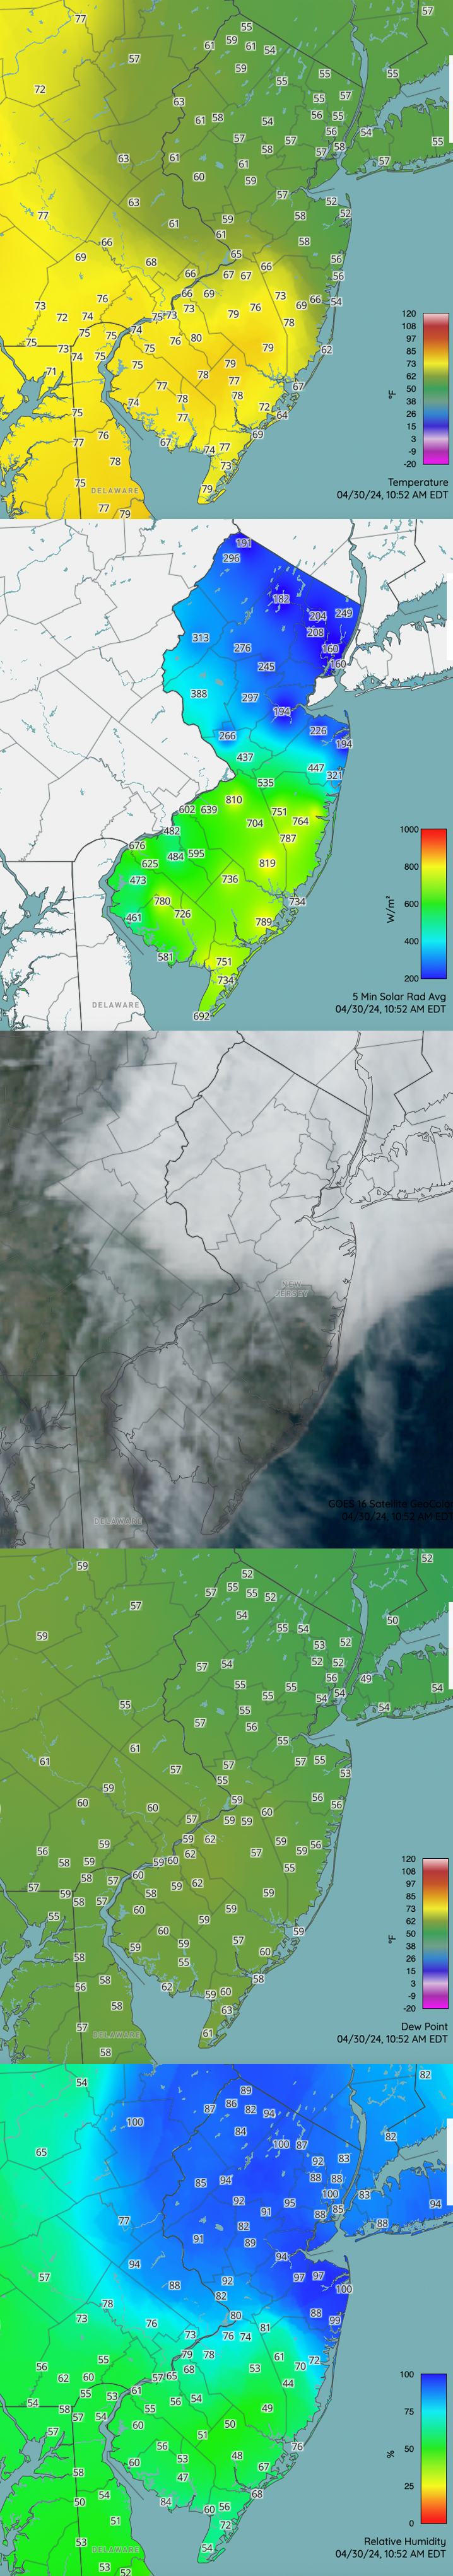 NJWxNet maps showing conditions across NJ and surroundings at 1052AM on April 30th as a backdoor cold front is draped across central NJ. Top: Air temperature. Second: incoming solar radiation. Third: visible satellite image. Fourth: dew point temperature. Bottom: relative humidity.